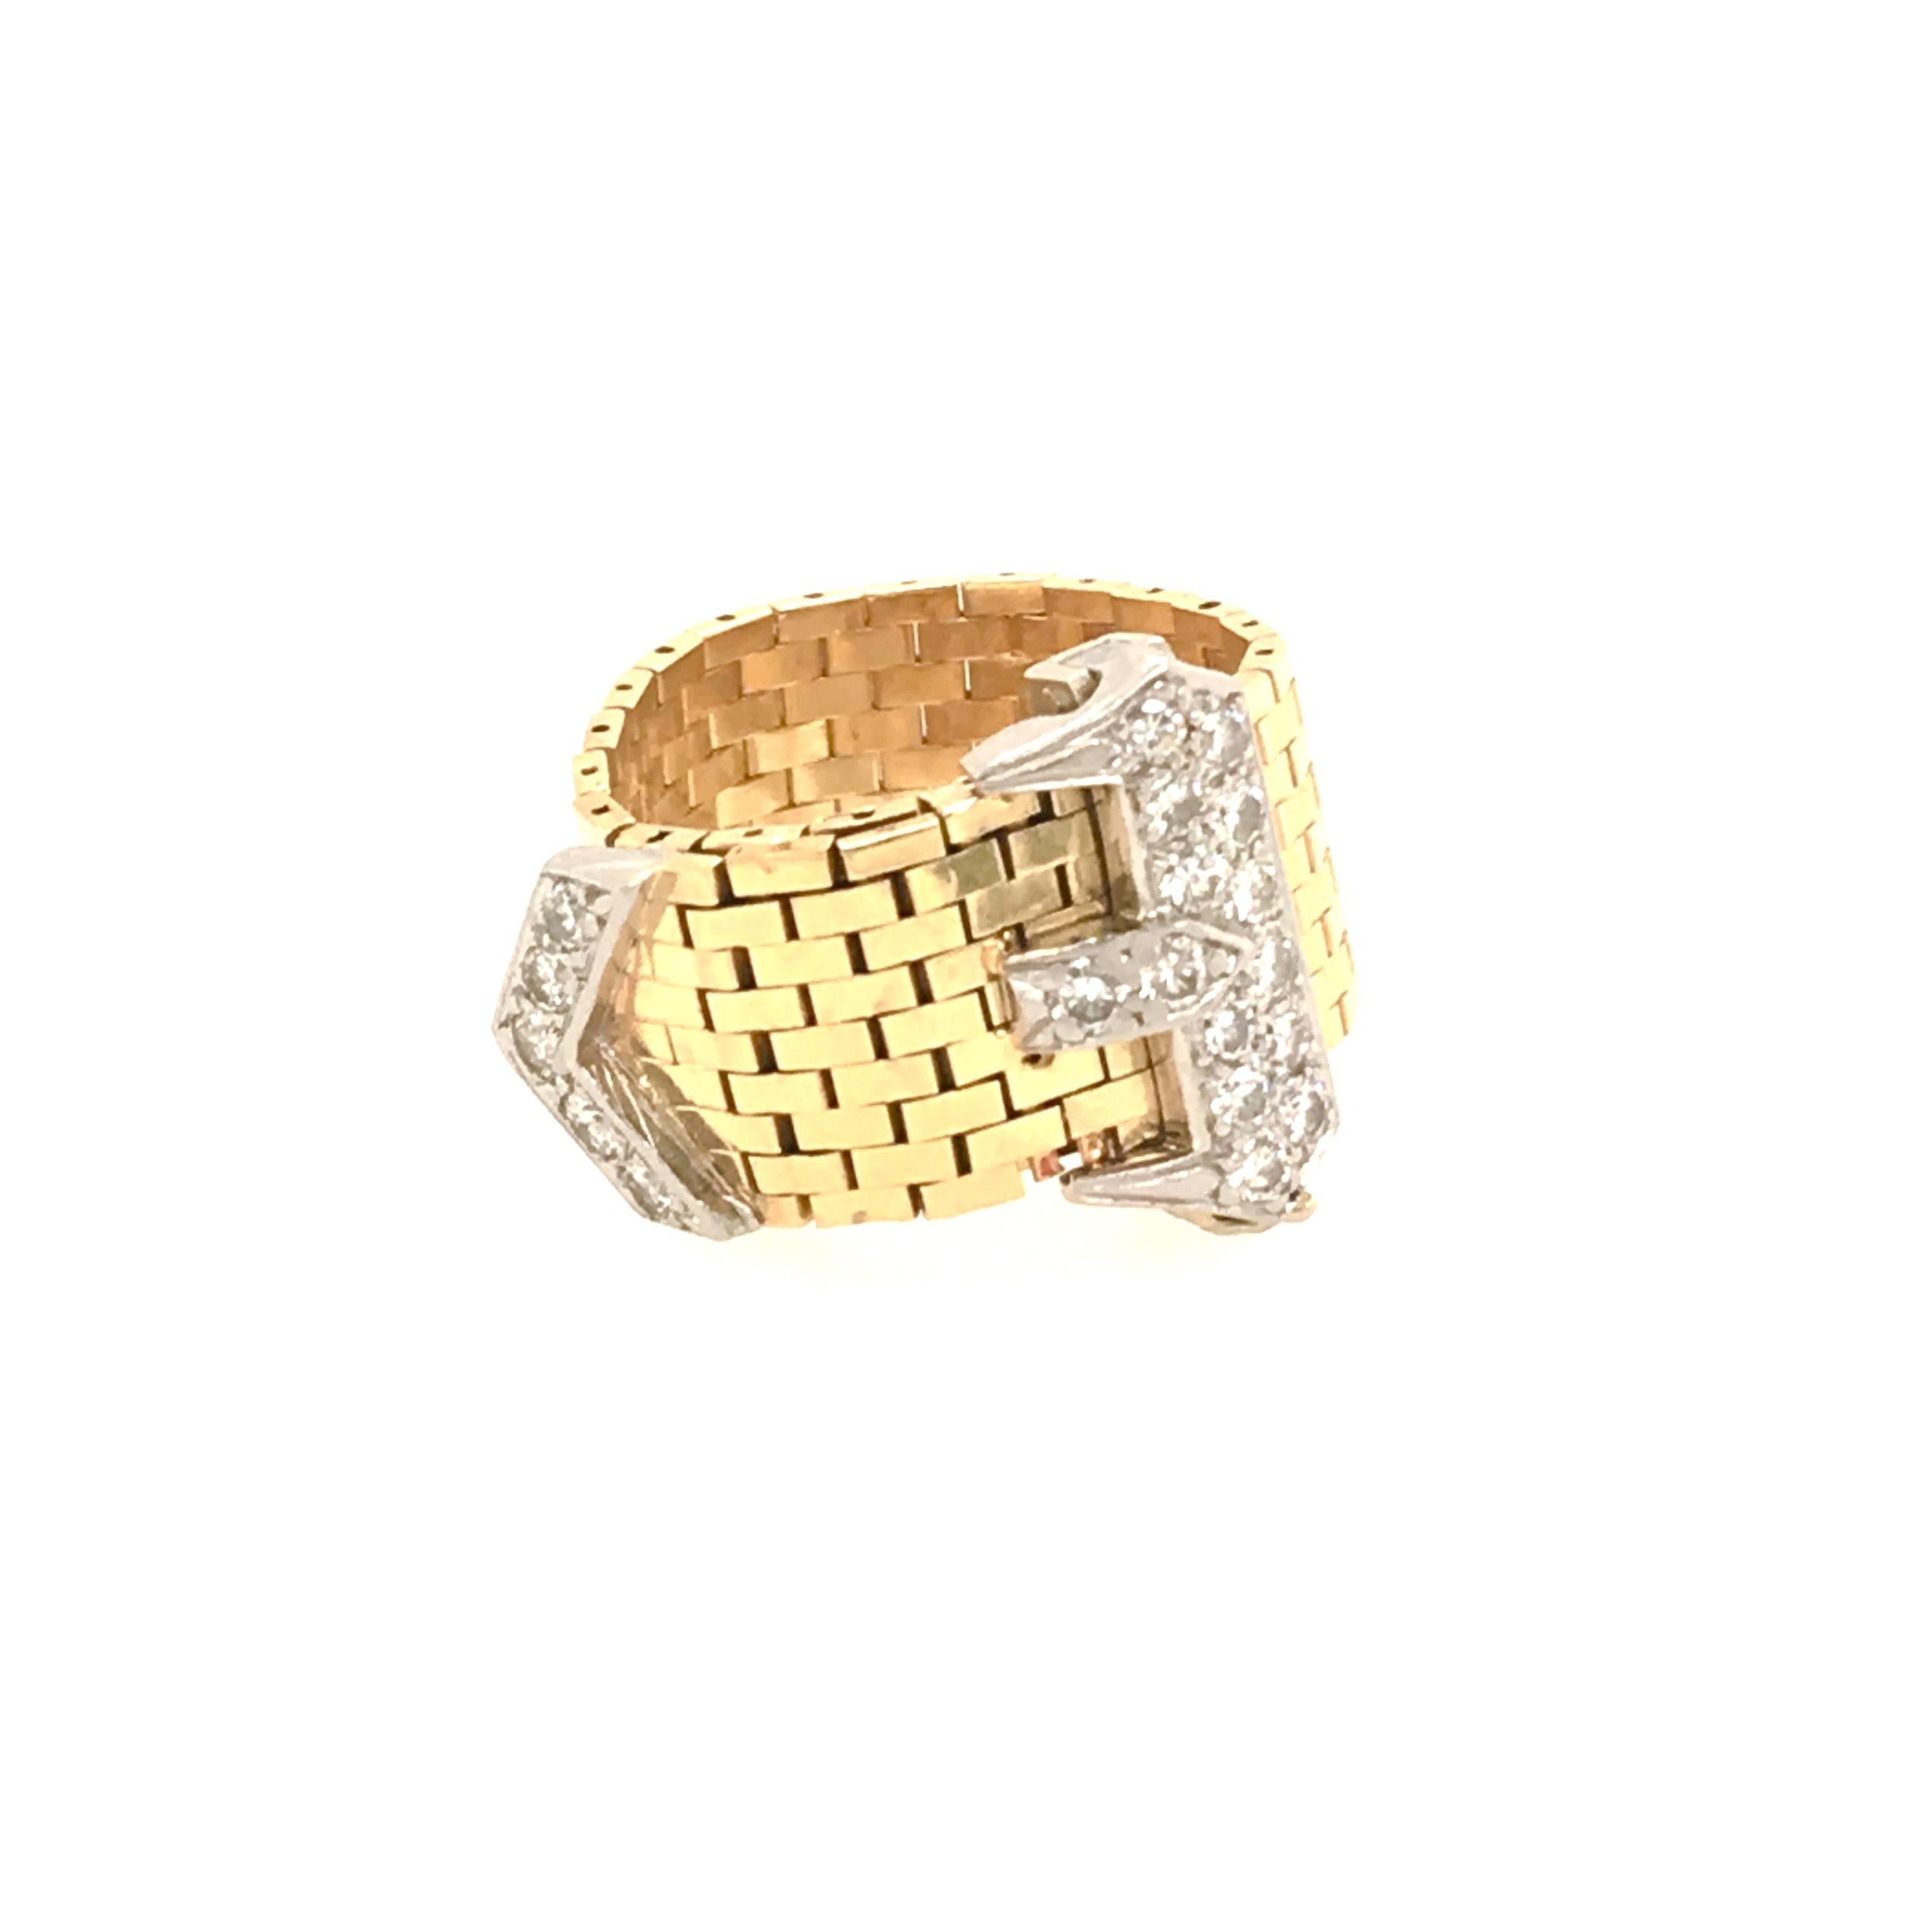 A 14 karat yellow gold and diamond ring. Corbett & Bertolone. Circa 1950. Of brick link design, joined by a pave set diamond buckle. Diamonds weigh approximately 0.60 carat. size is approximately 6, gross weight is approximately 10.4 grams. With